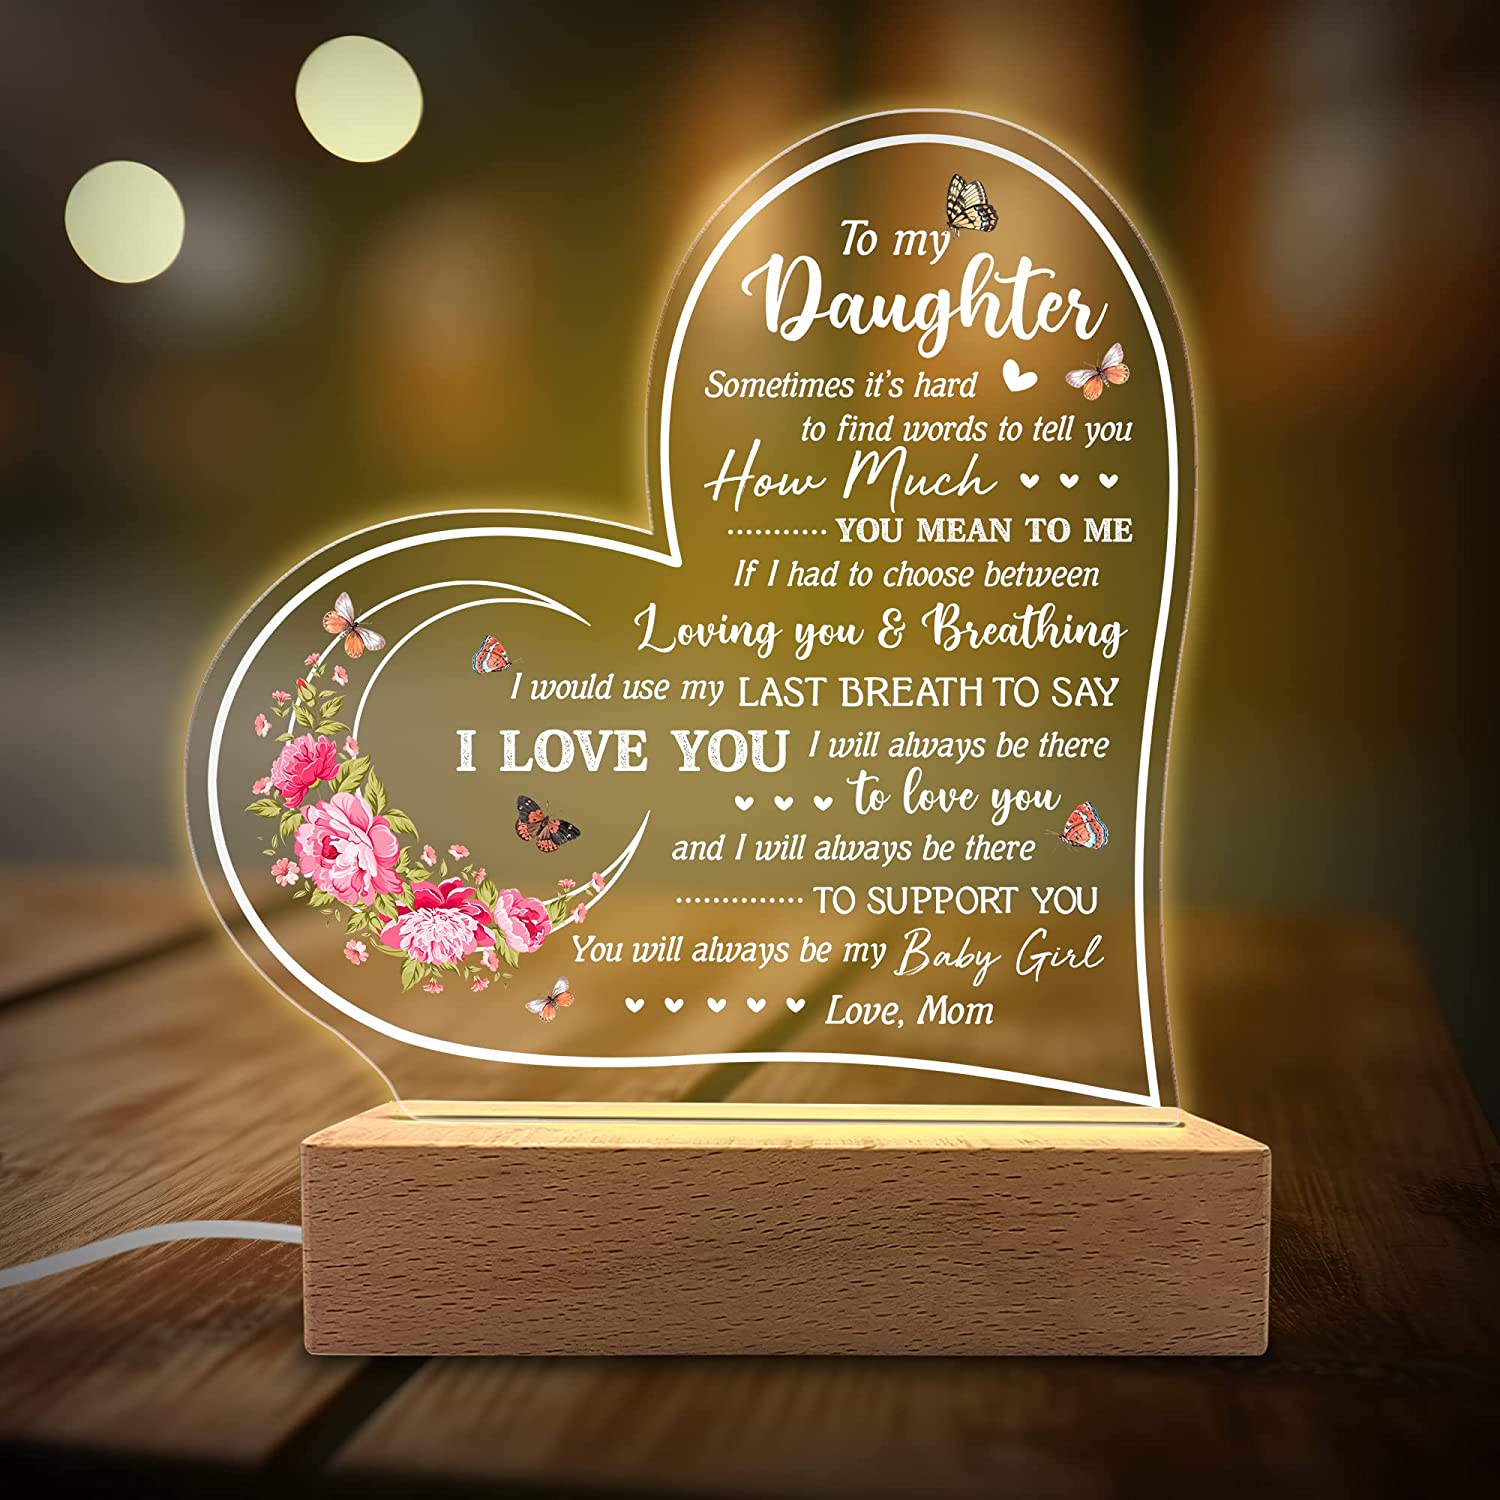 Mom Gifts, Gifts For Mom Night Light Lamp, Mom Birthday Gifts